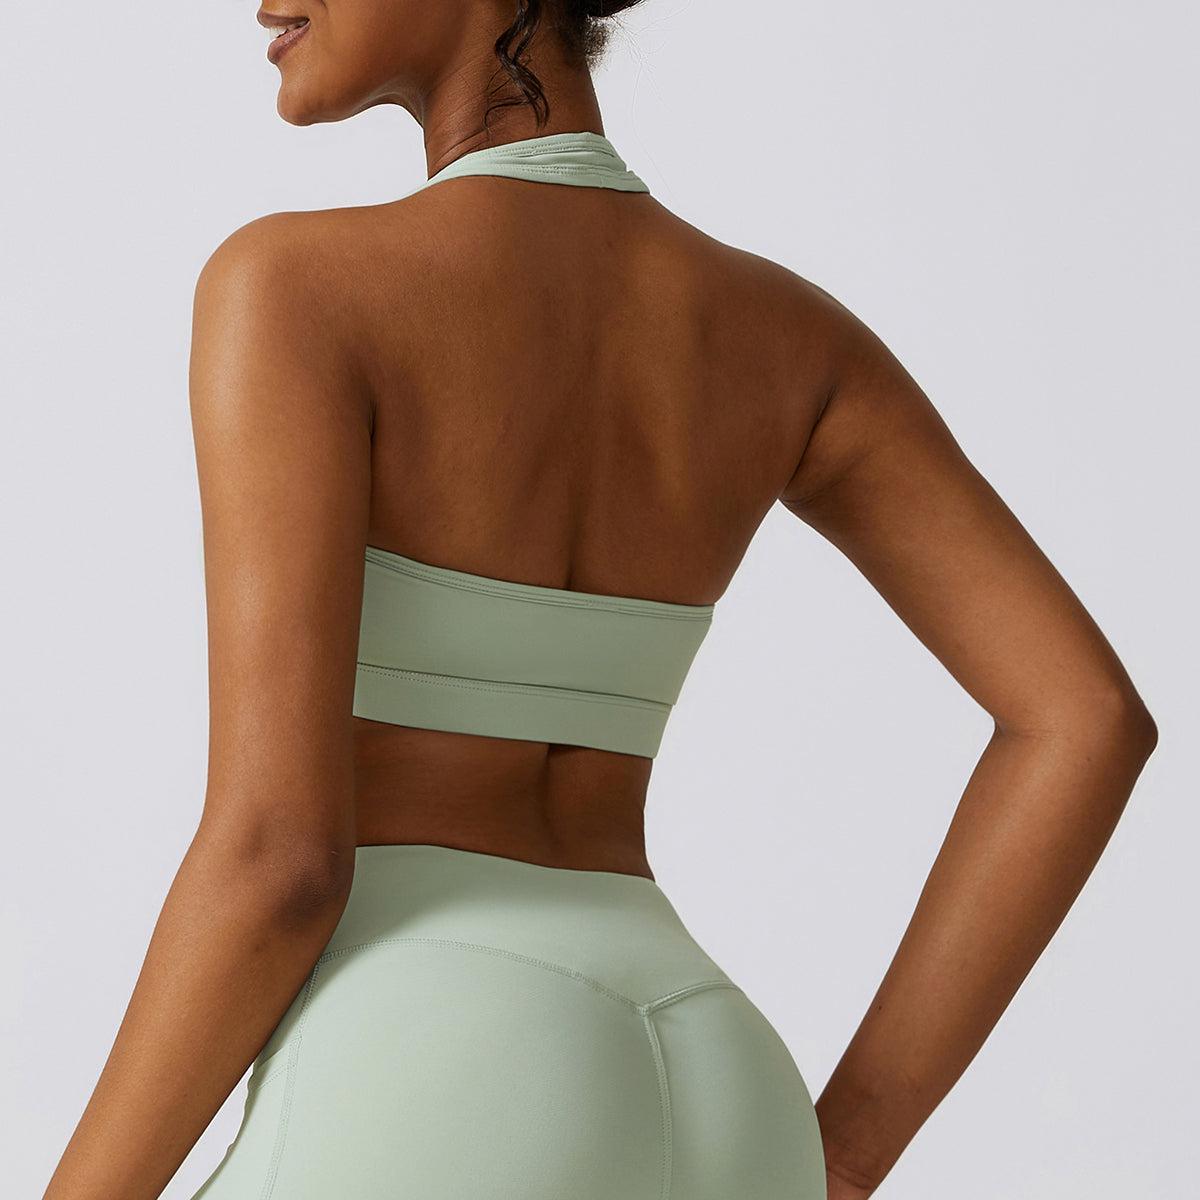 the back of a woman in a green sports bra top